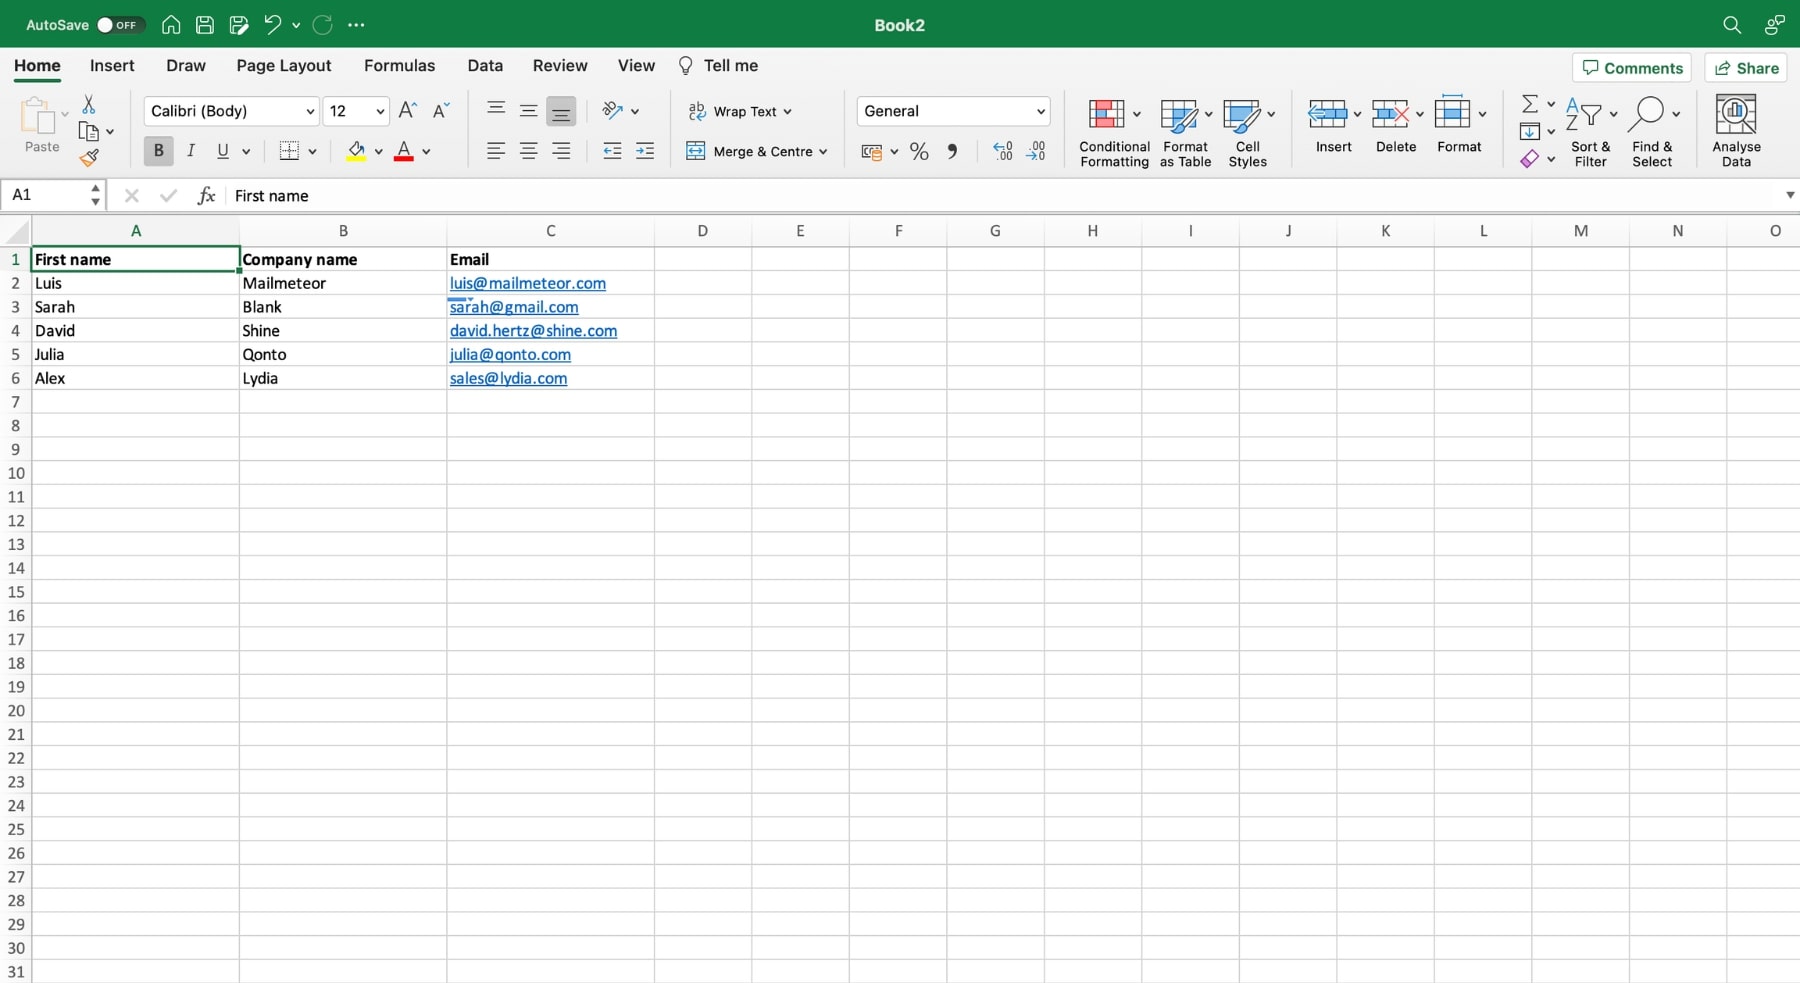 Consolidate your mail merge data in Excel